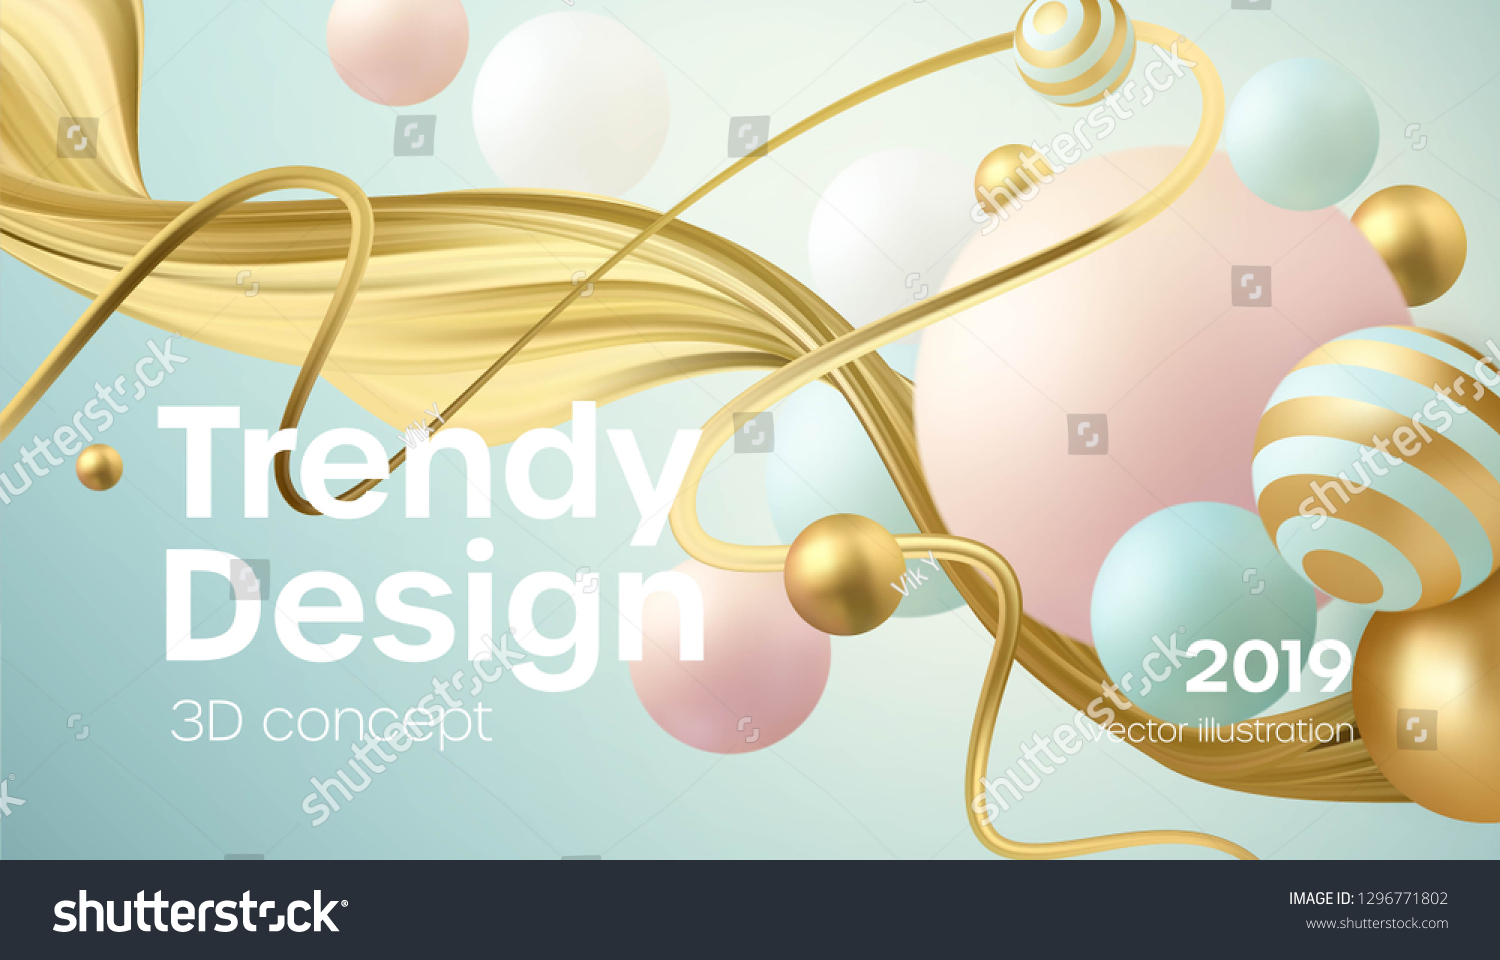 stock-vector-flowing-soft-spheres-abstract-background-with-d-geometric-shapes-modern-cover-design-vector-1296771802